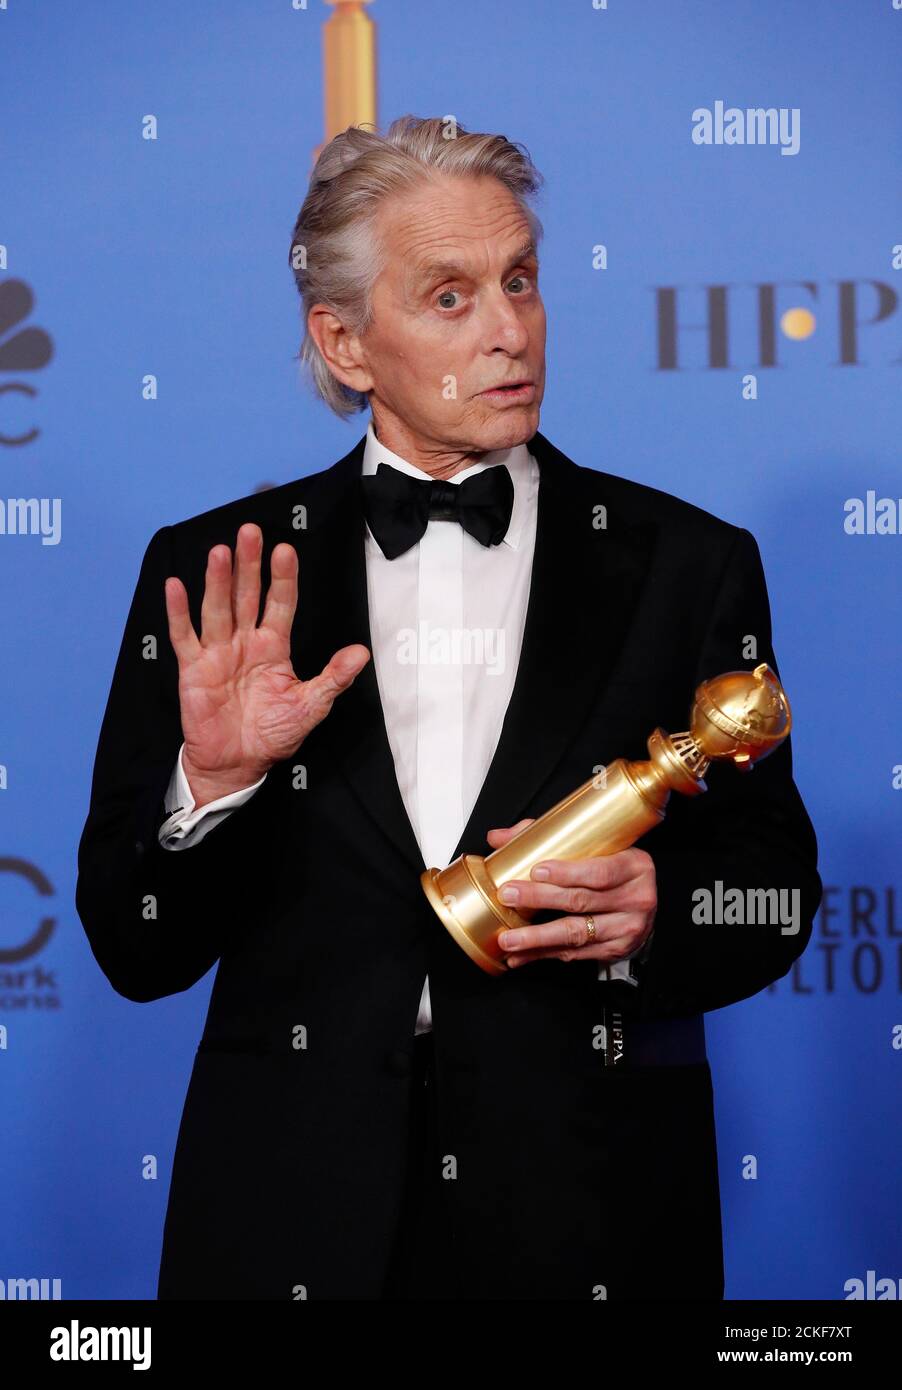 76th Golden Globe Awards - Photo Room - Beverly Hills, California, U.S., January 6, 2019 Michael Douglas poses backstage with his trophy for Best Performance by an Actor in a Television Series - Musical or Comedy  for 'The Kominsky Method'. REUTERS/Mario Anzuoni Stock Photo